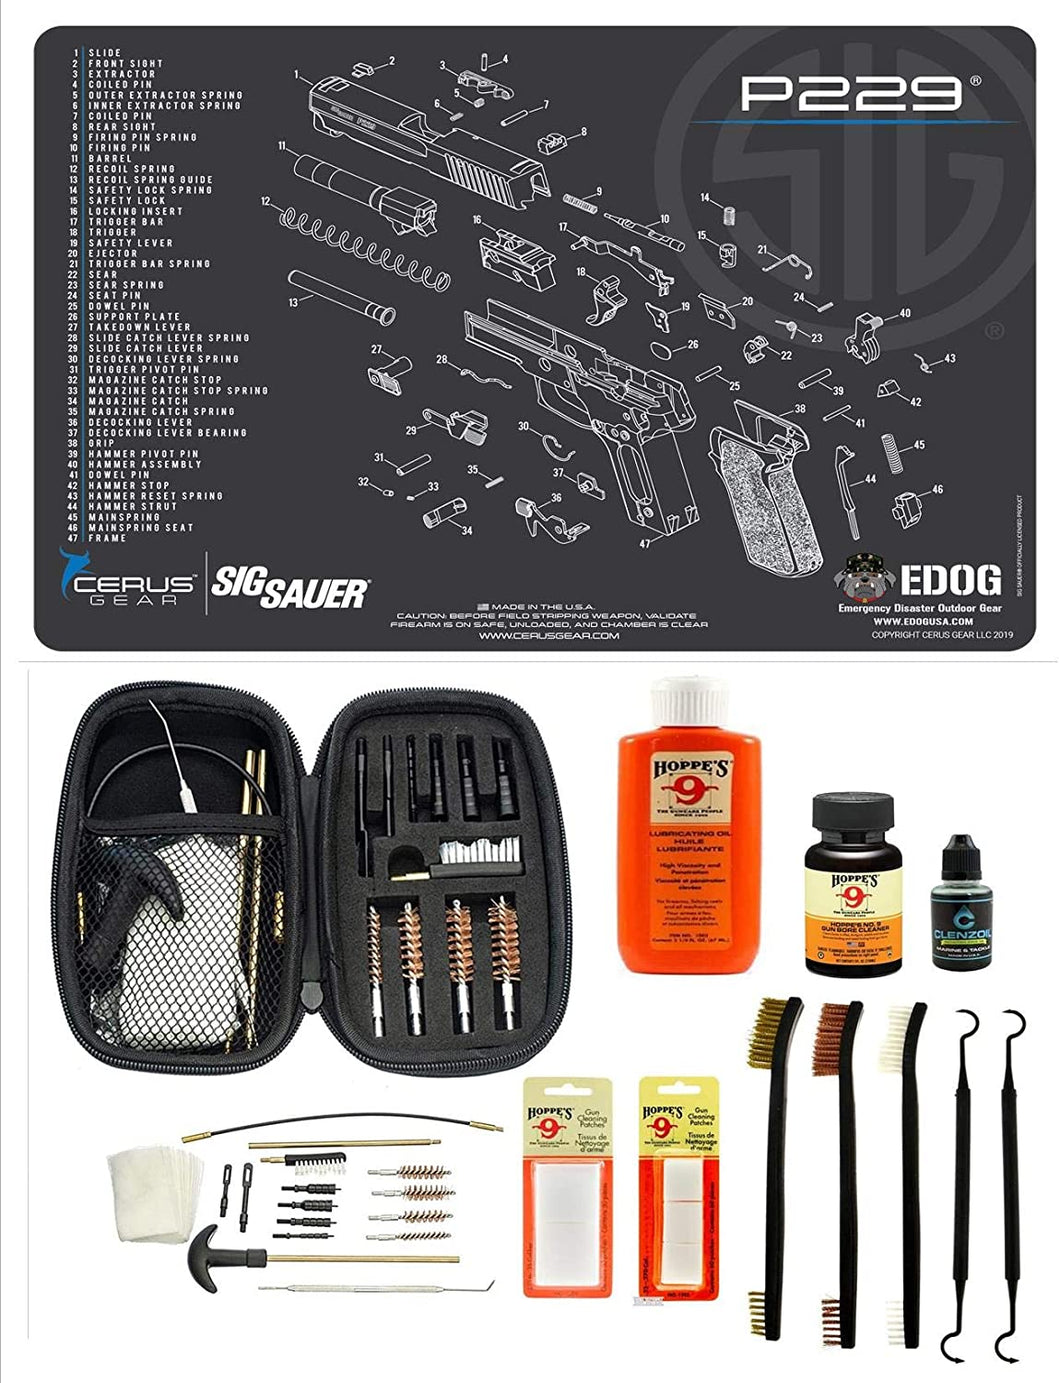 Range Warrior 27 Pc Gun Cleaning Kit - Compatible with Sig Sauer P229 - Schematic (Exploded View) Mat .22 9mm - .45 Kit